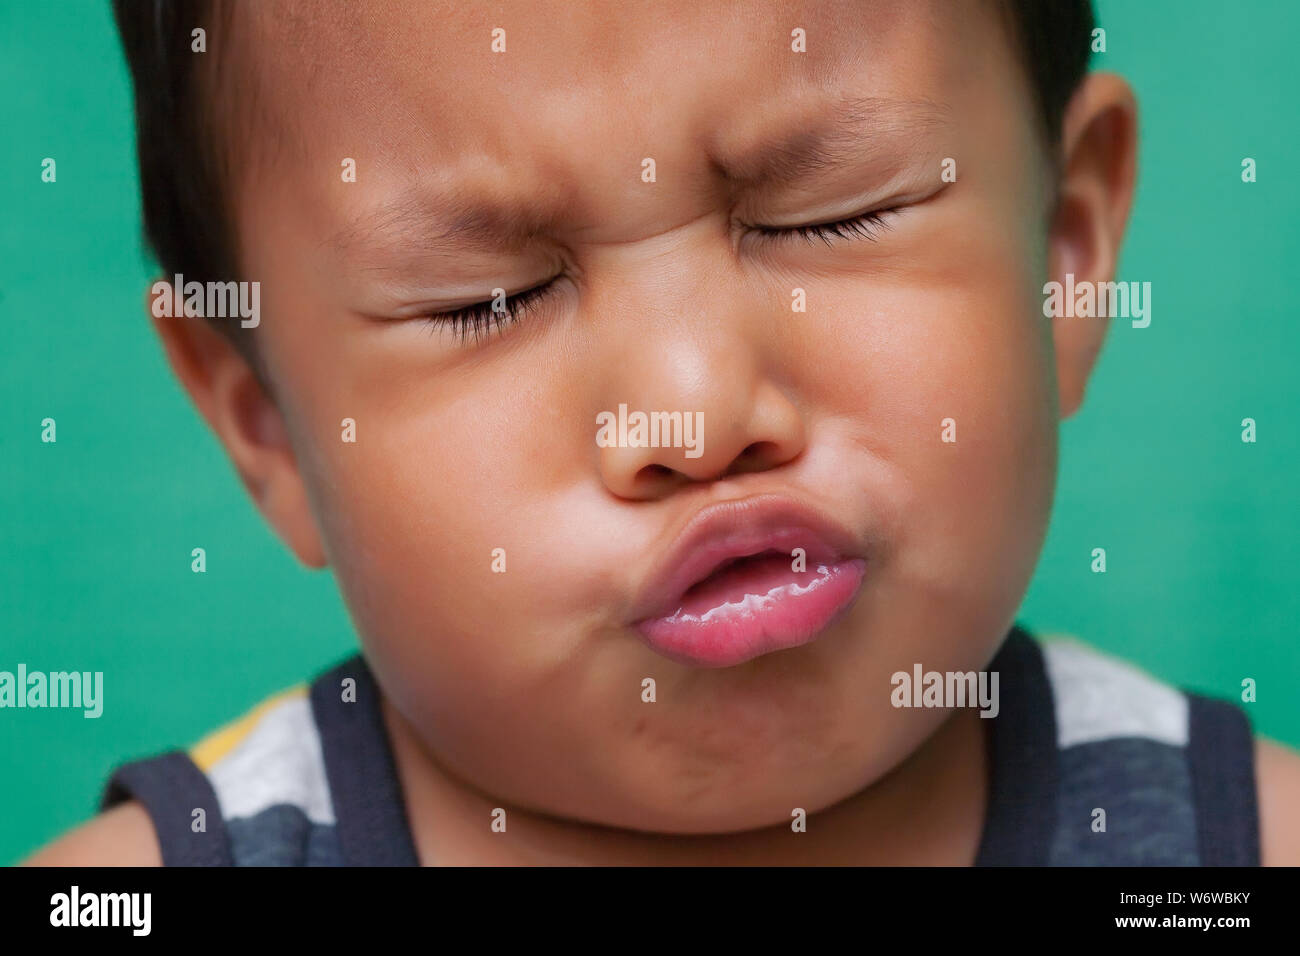 Young boy showing signs of distress with grimacing face. Stock Photo